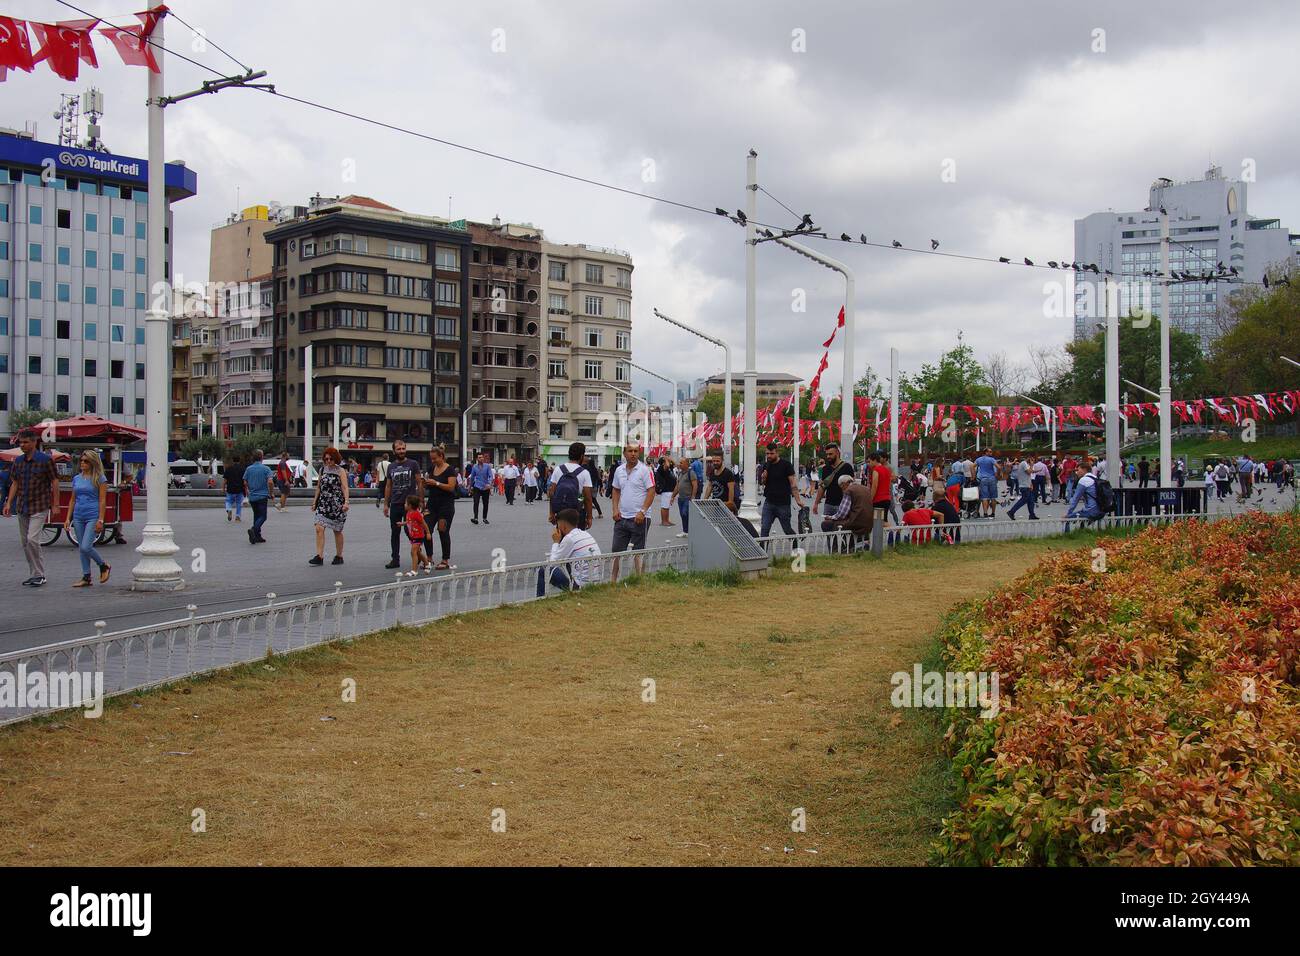 Istanbul - The crowded Taksim square with the new buildings and the numerous red and white flags symbol of Turkey. Stock Photo